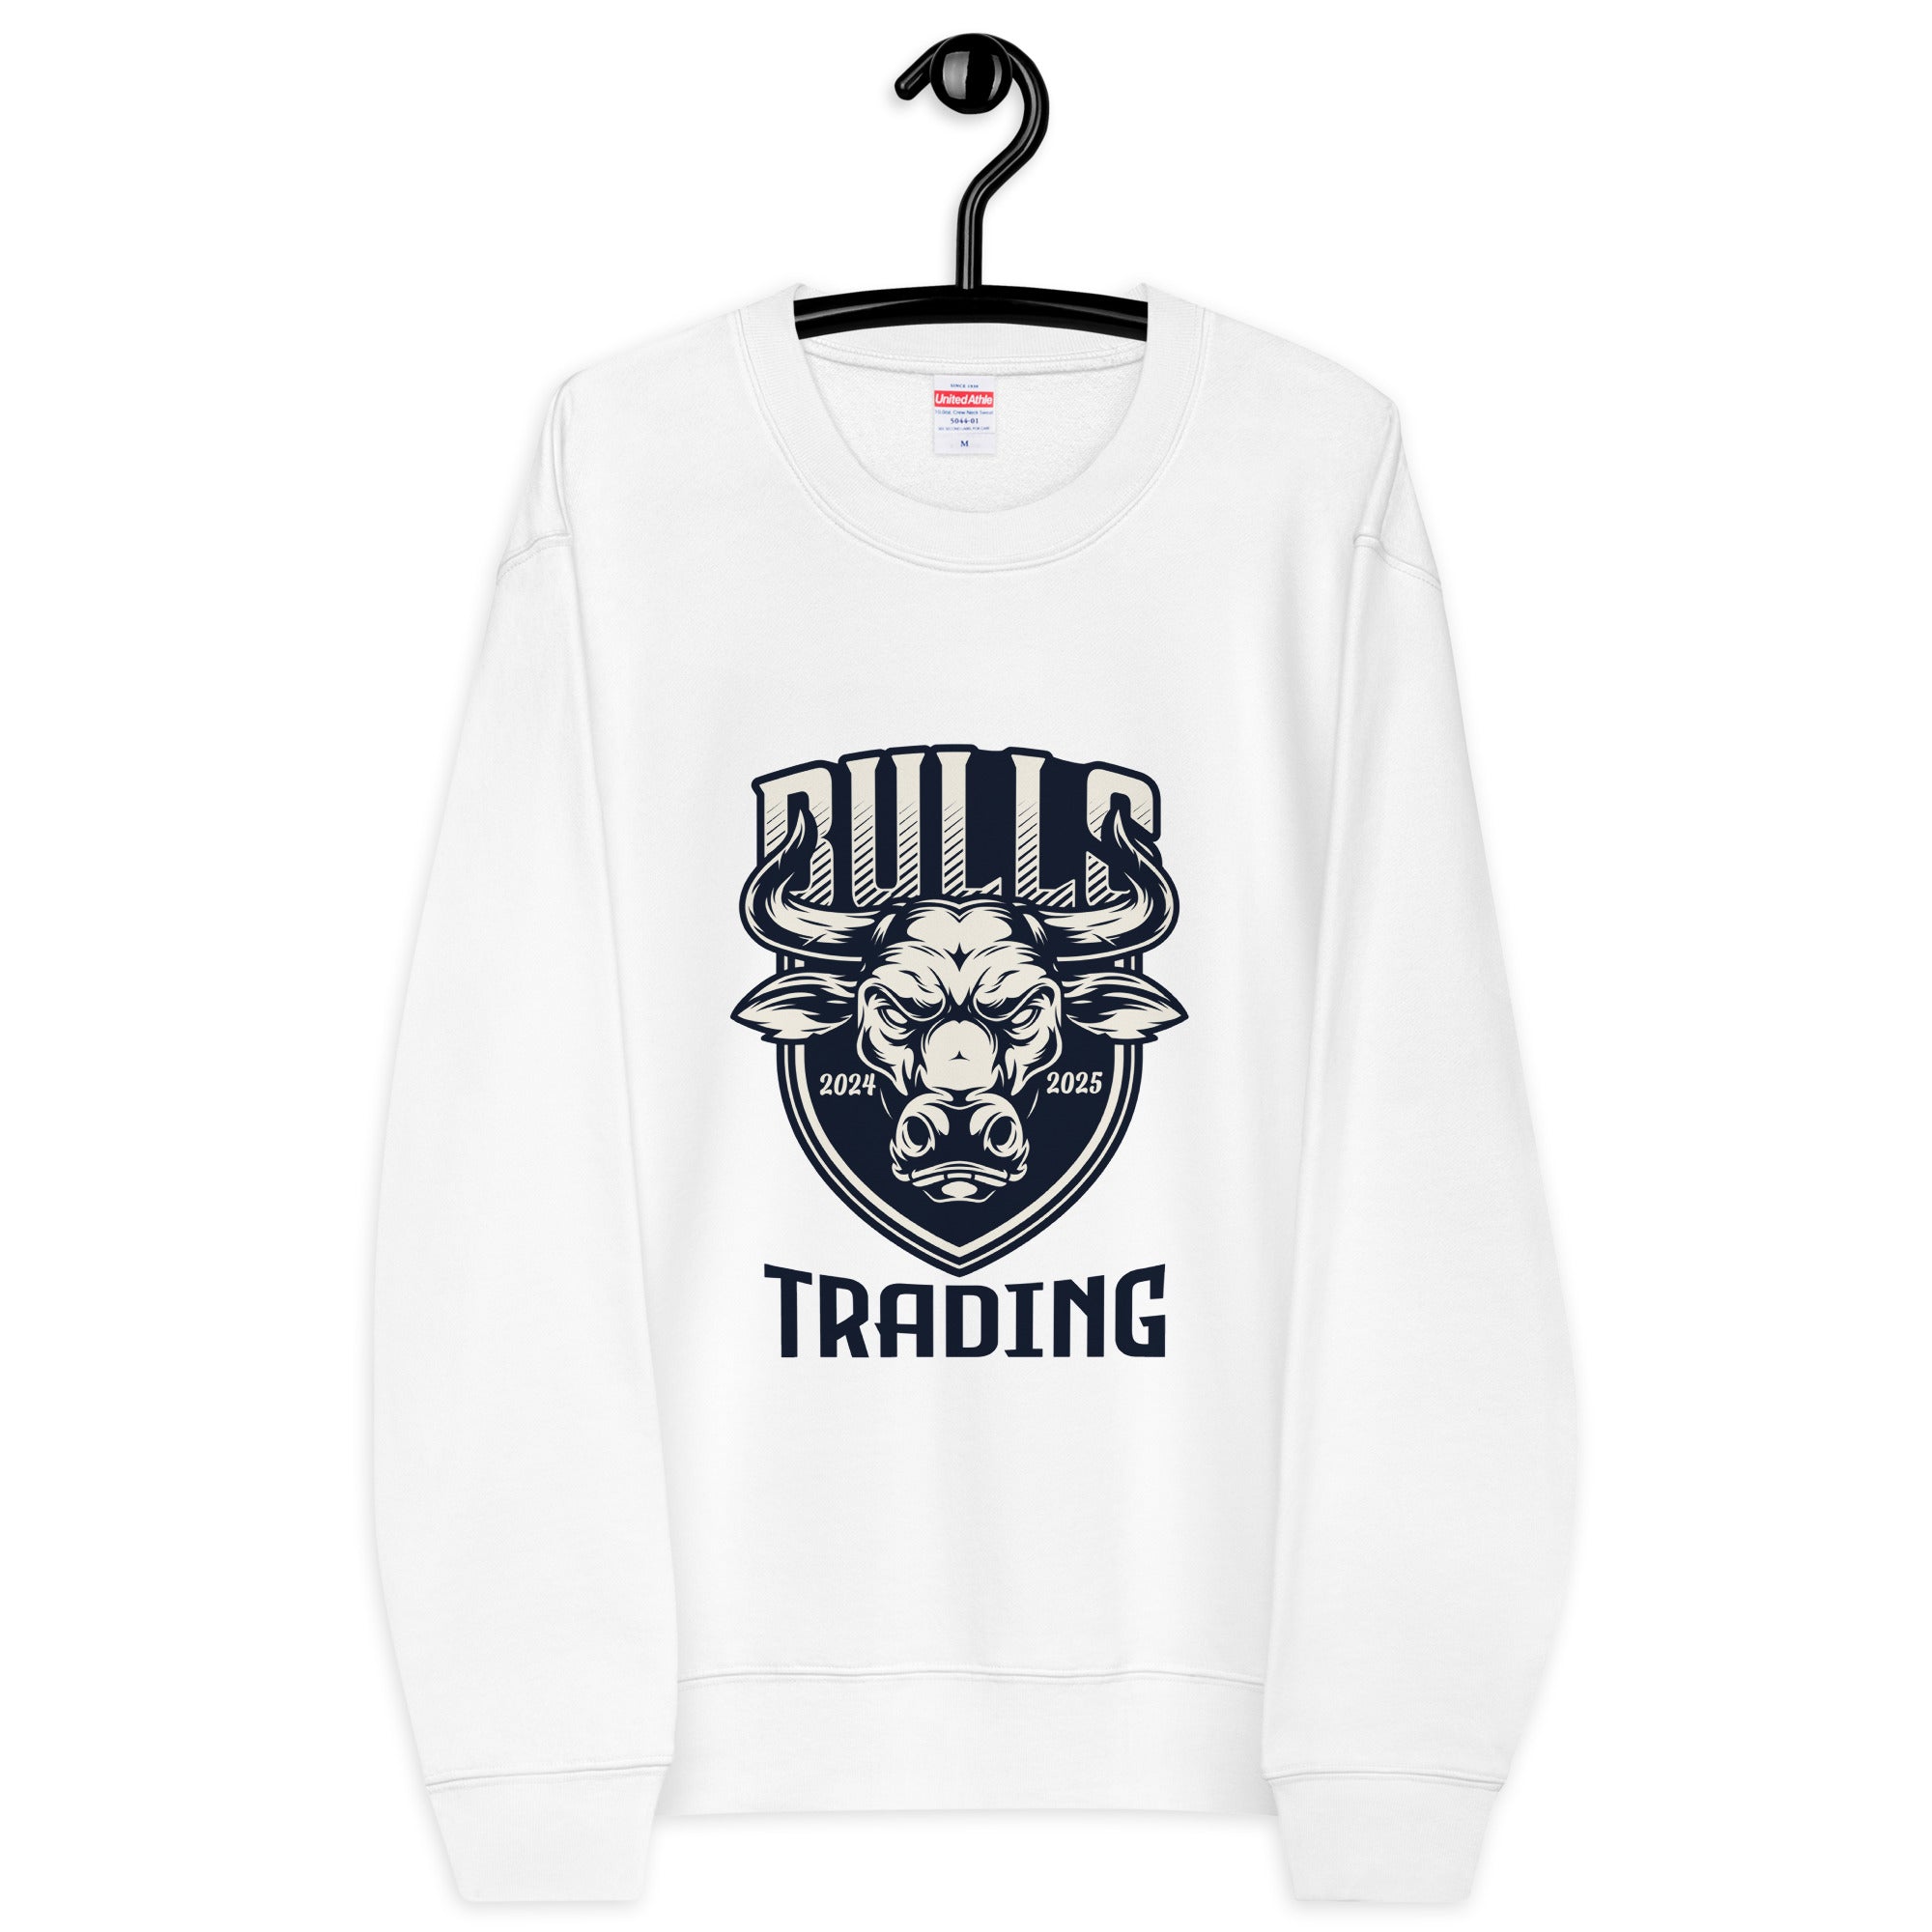 Niccie Style for Bulls Trading, Unisex French Terry Sweatshirt